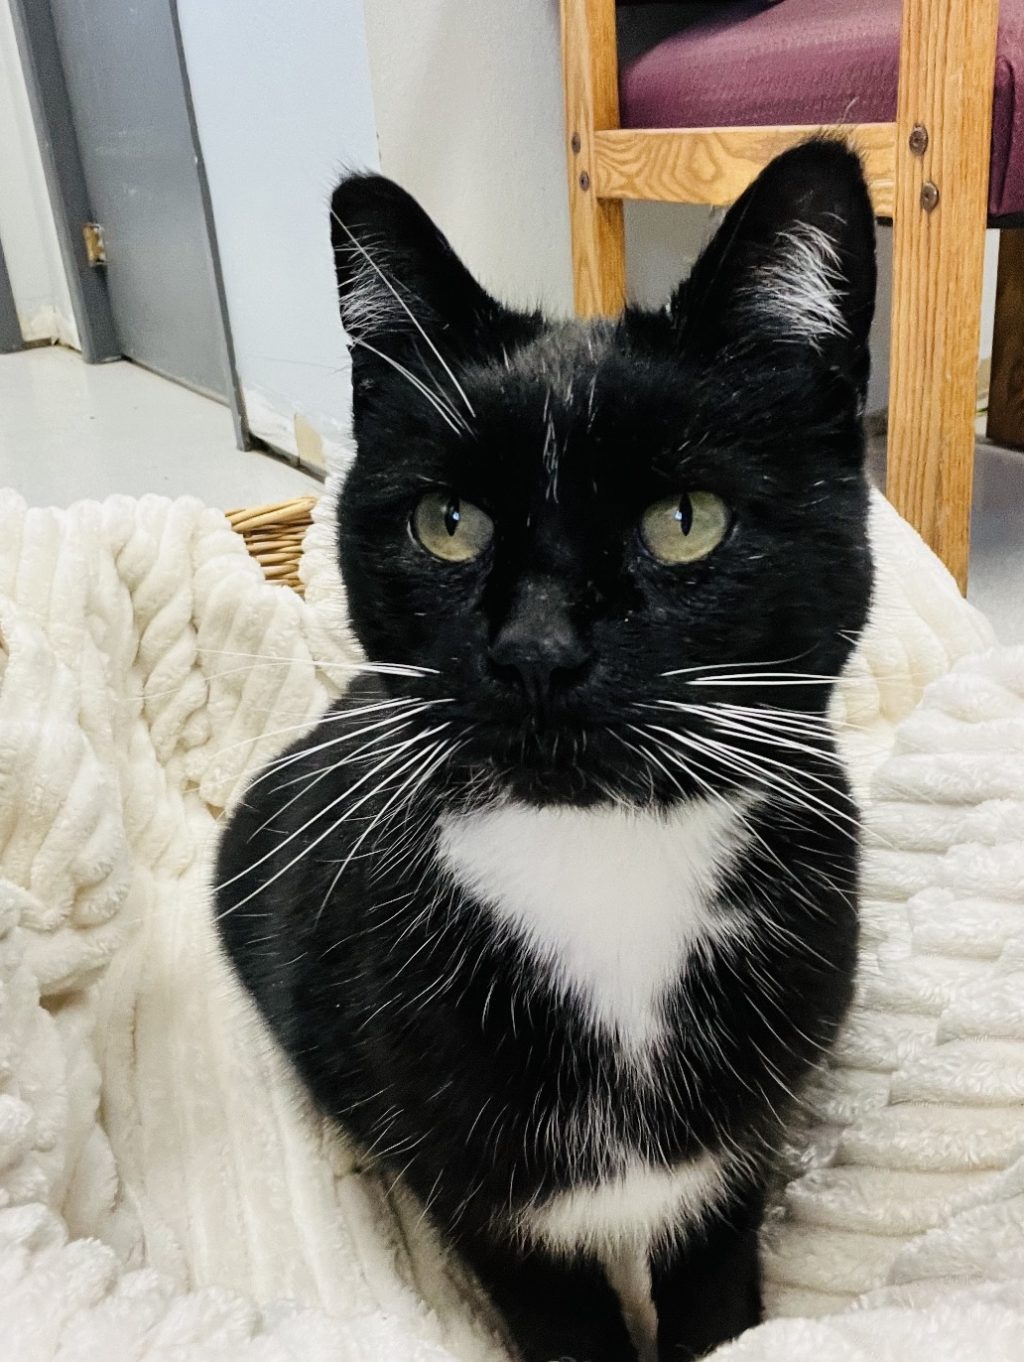 A dapper gal, Socks is an 8 year old tuxedo. With her unique squeak like meow, Socks loves pets and playing with a cat teaser. Socks is available for adoption, come meet this sweet little girl!